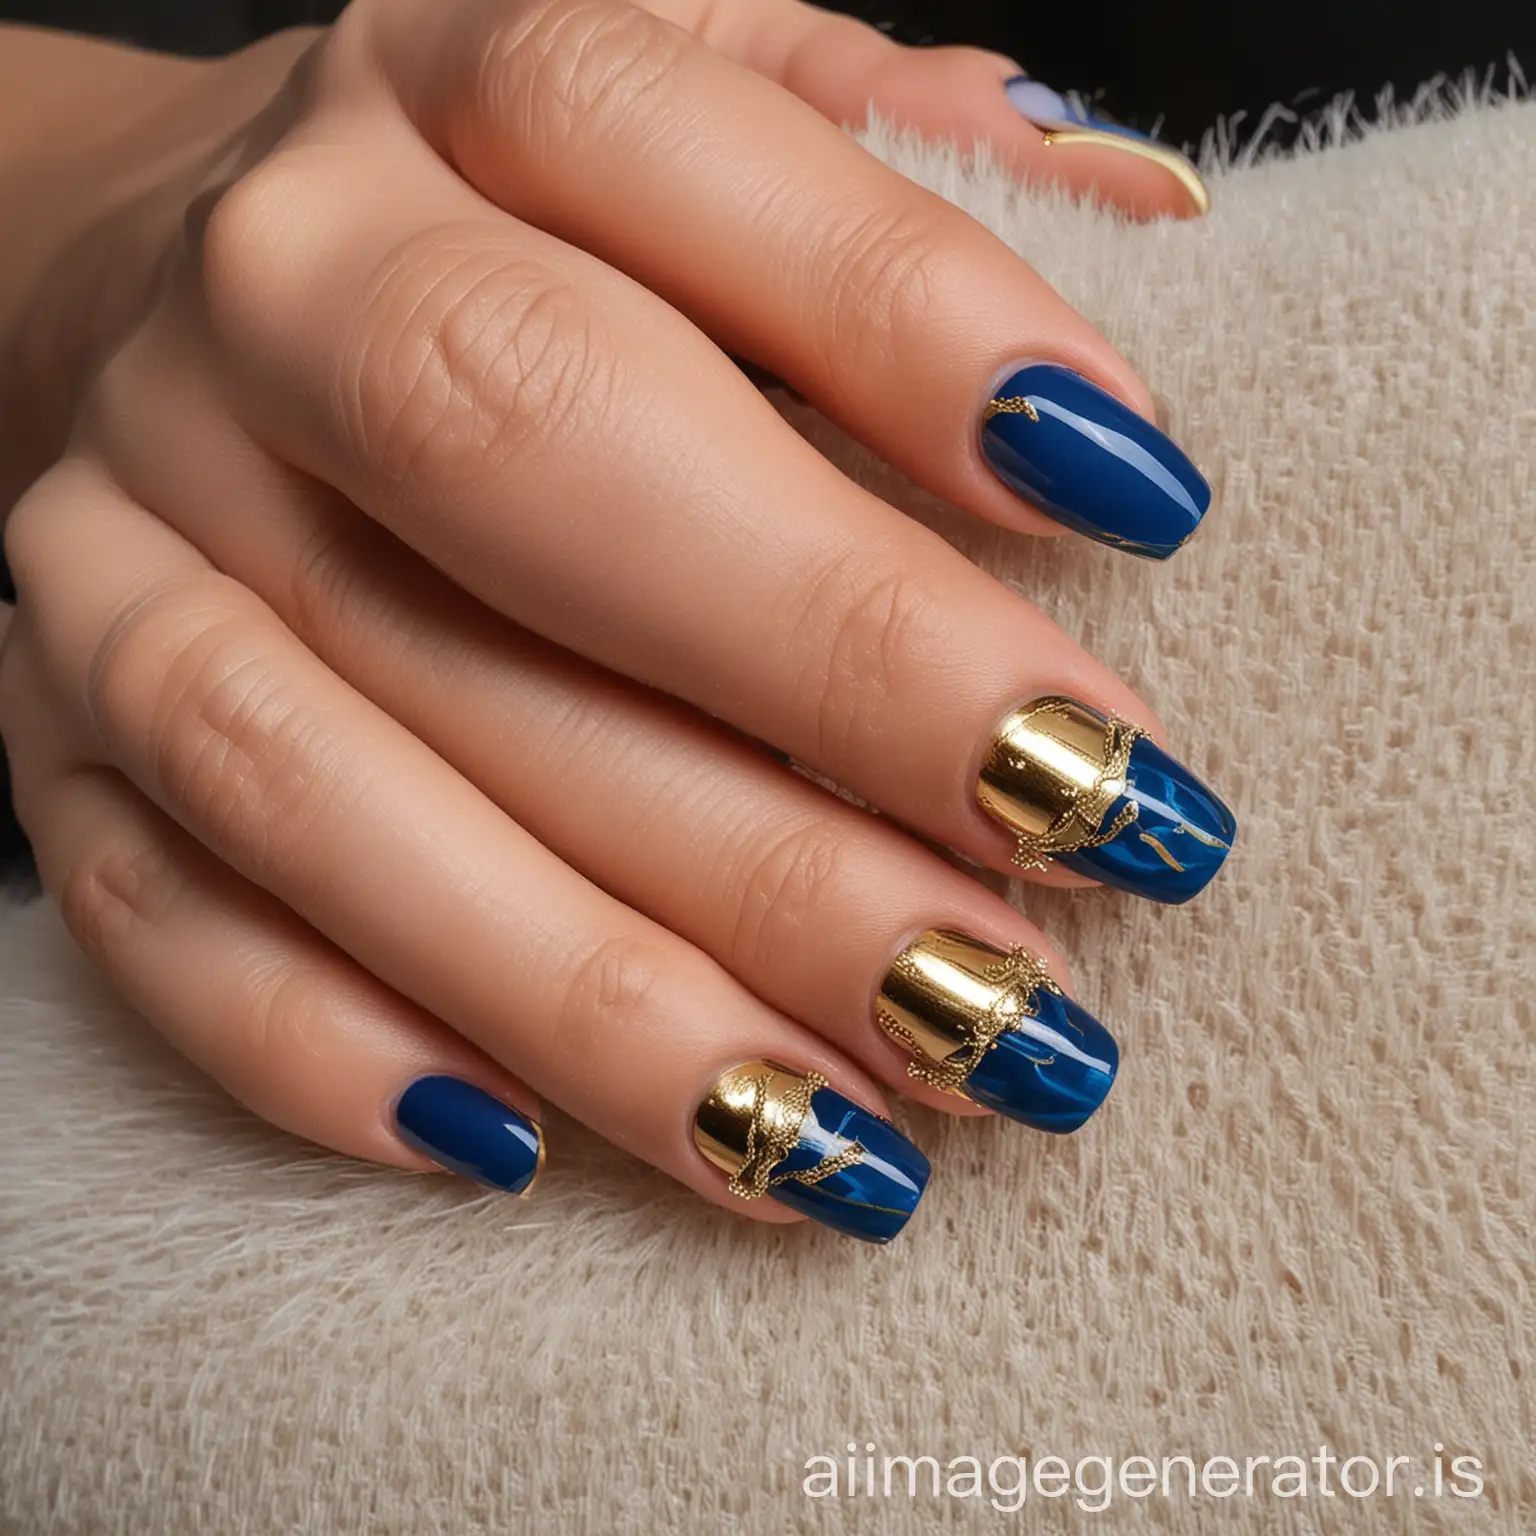 gold and blue trending French based nail art one hand, beautiful perfect long nails manicure photography